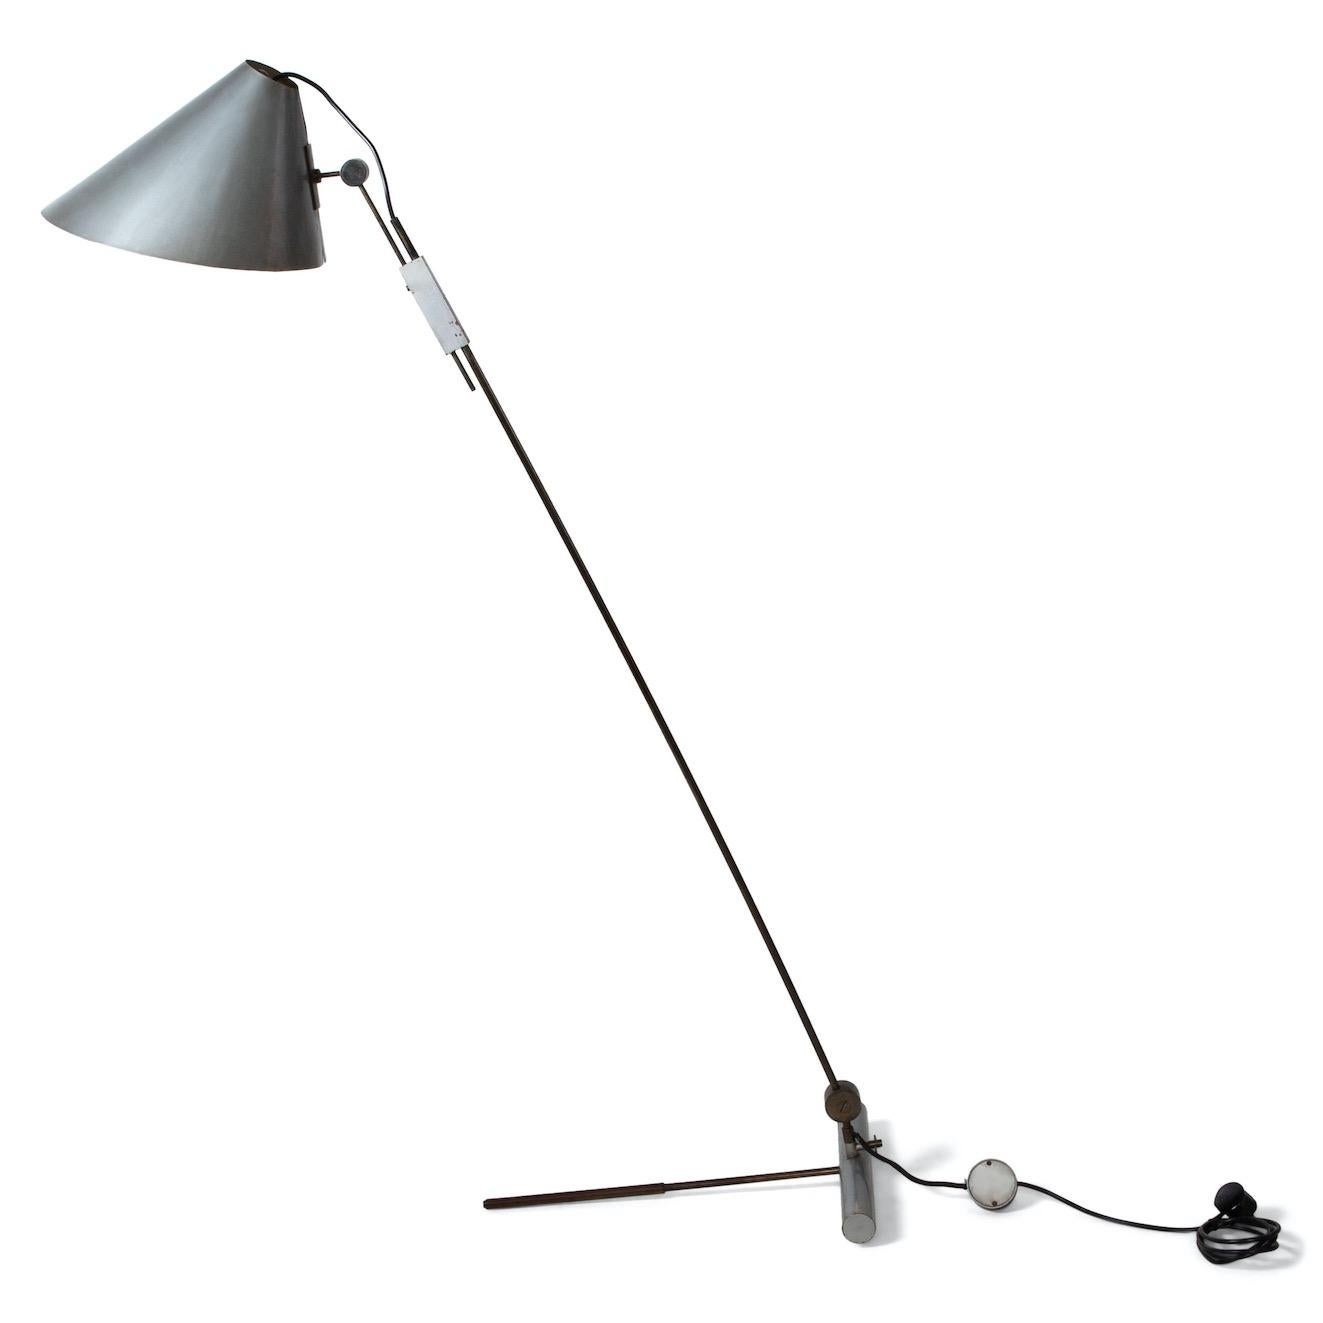 Floor lamp by Tito Agnoli (1931-2012) on cylindrical T-shaped base with slender brass shaft and tilting grey conical lampshade. Designed for O-Luce in 1954.
Lit: Domus n. 314, Una Selezione di Gusto per la Casa, January 1956, p. 53, fig. 21.
For